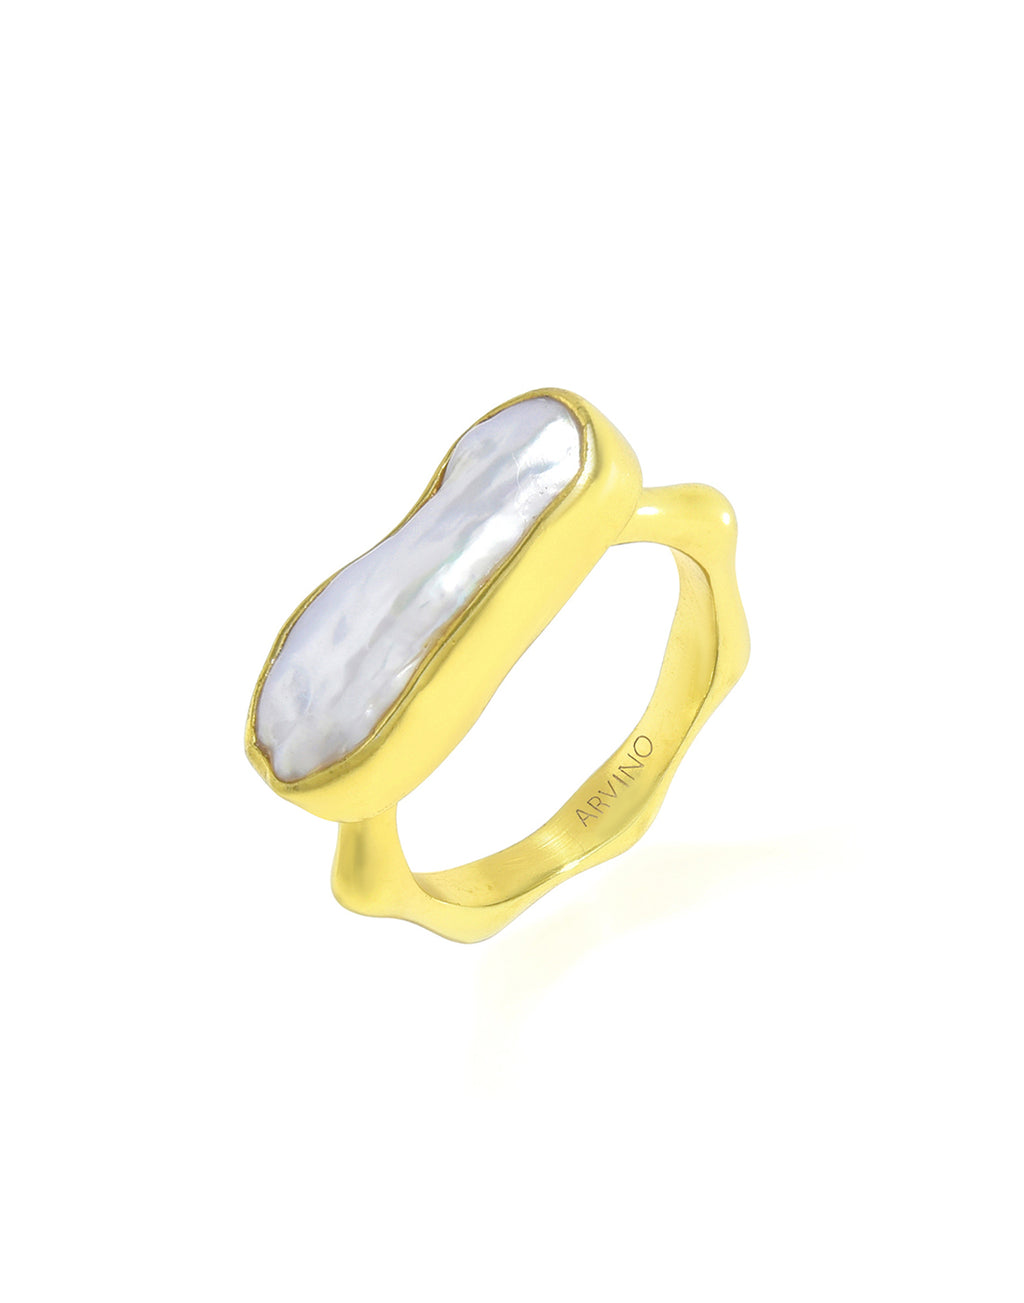 Baroque Pearl Ring - Statement Rings - Gold-Plated & Hypoallergenic Jewellery - Made in India - Dubai Jewellery - Dori